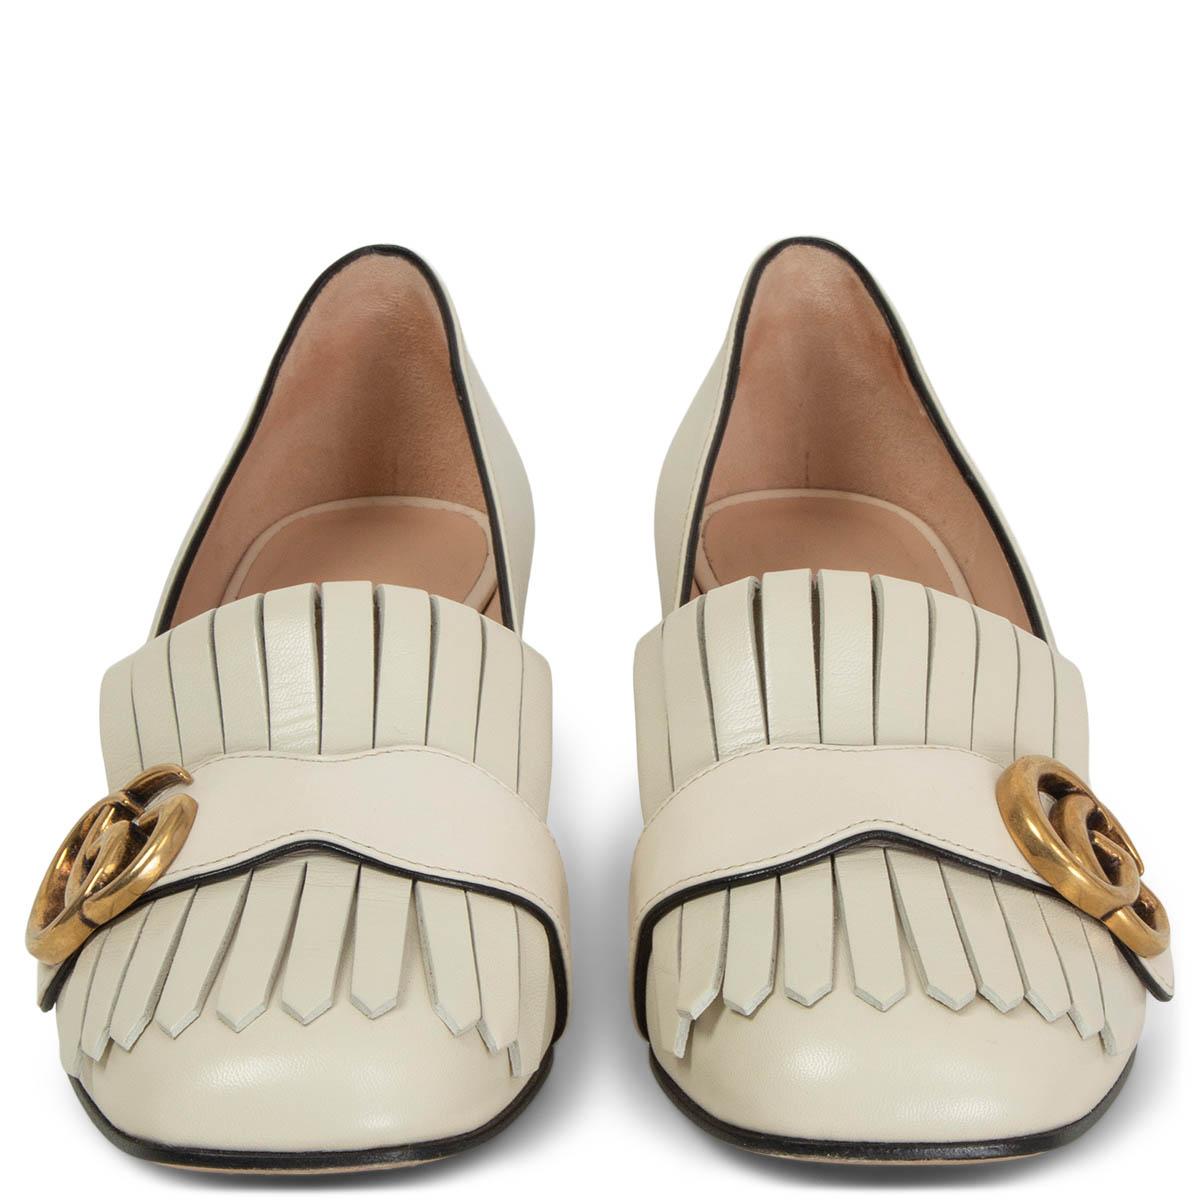 100% authentic Gucci Marmont mid-heel pump in ivory calfskin with Double G antique gold-tone hardware detail on fold over fringe. Have been worn and are in excellent condition. Come with dust bag. 

Measurements
Imprinted Size	36
Shoe Size	36
Inside